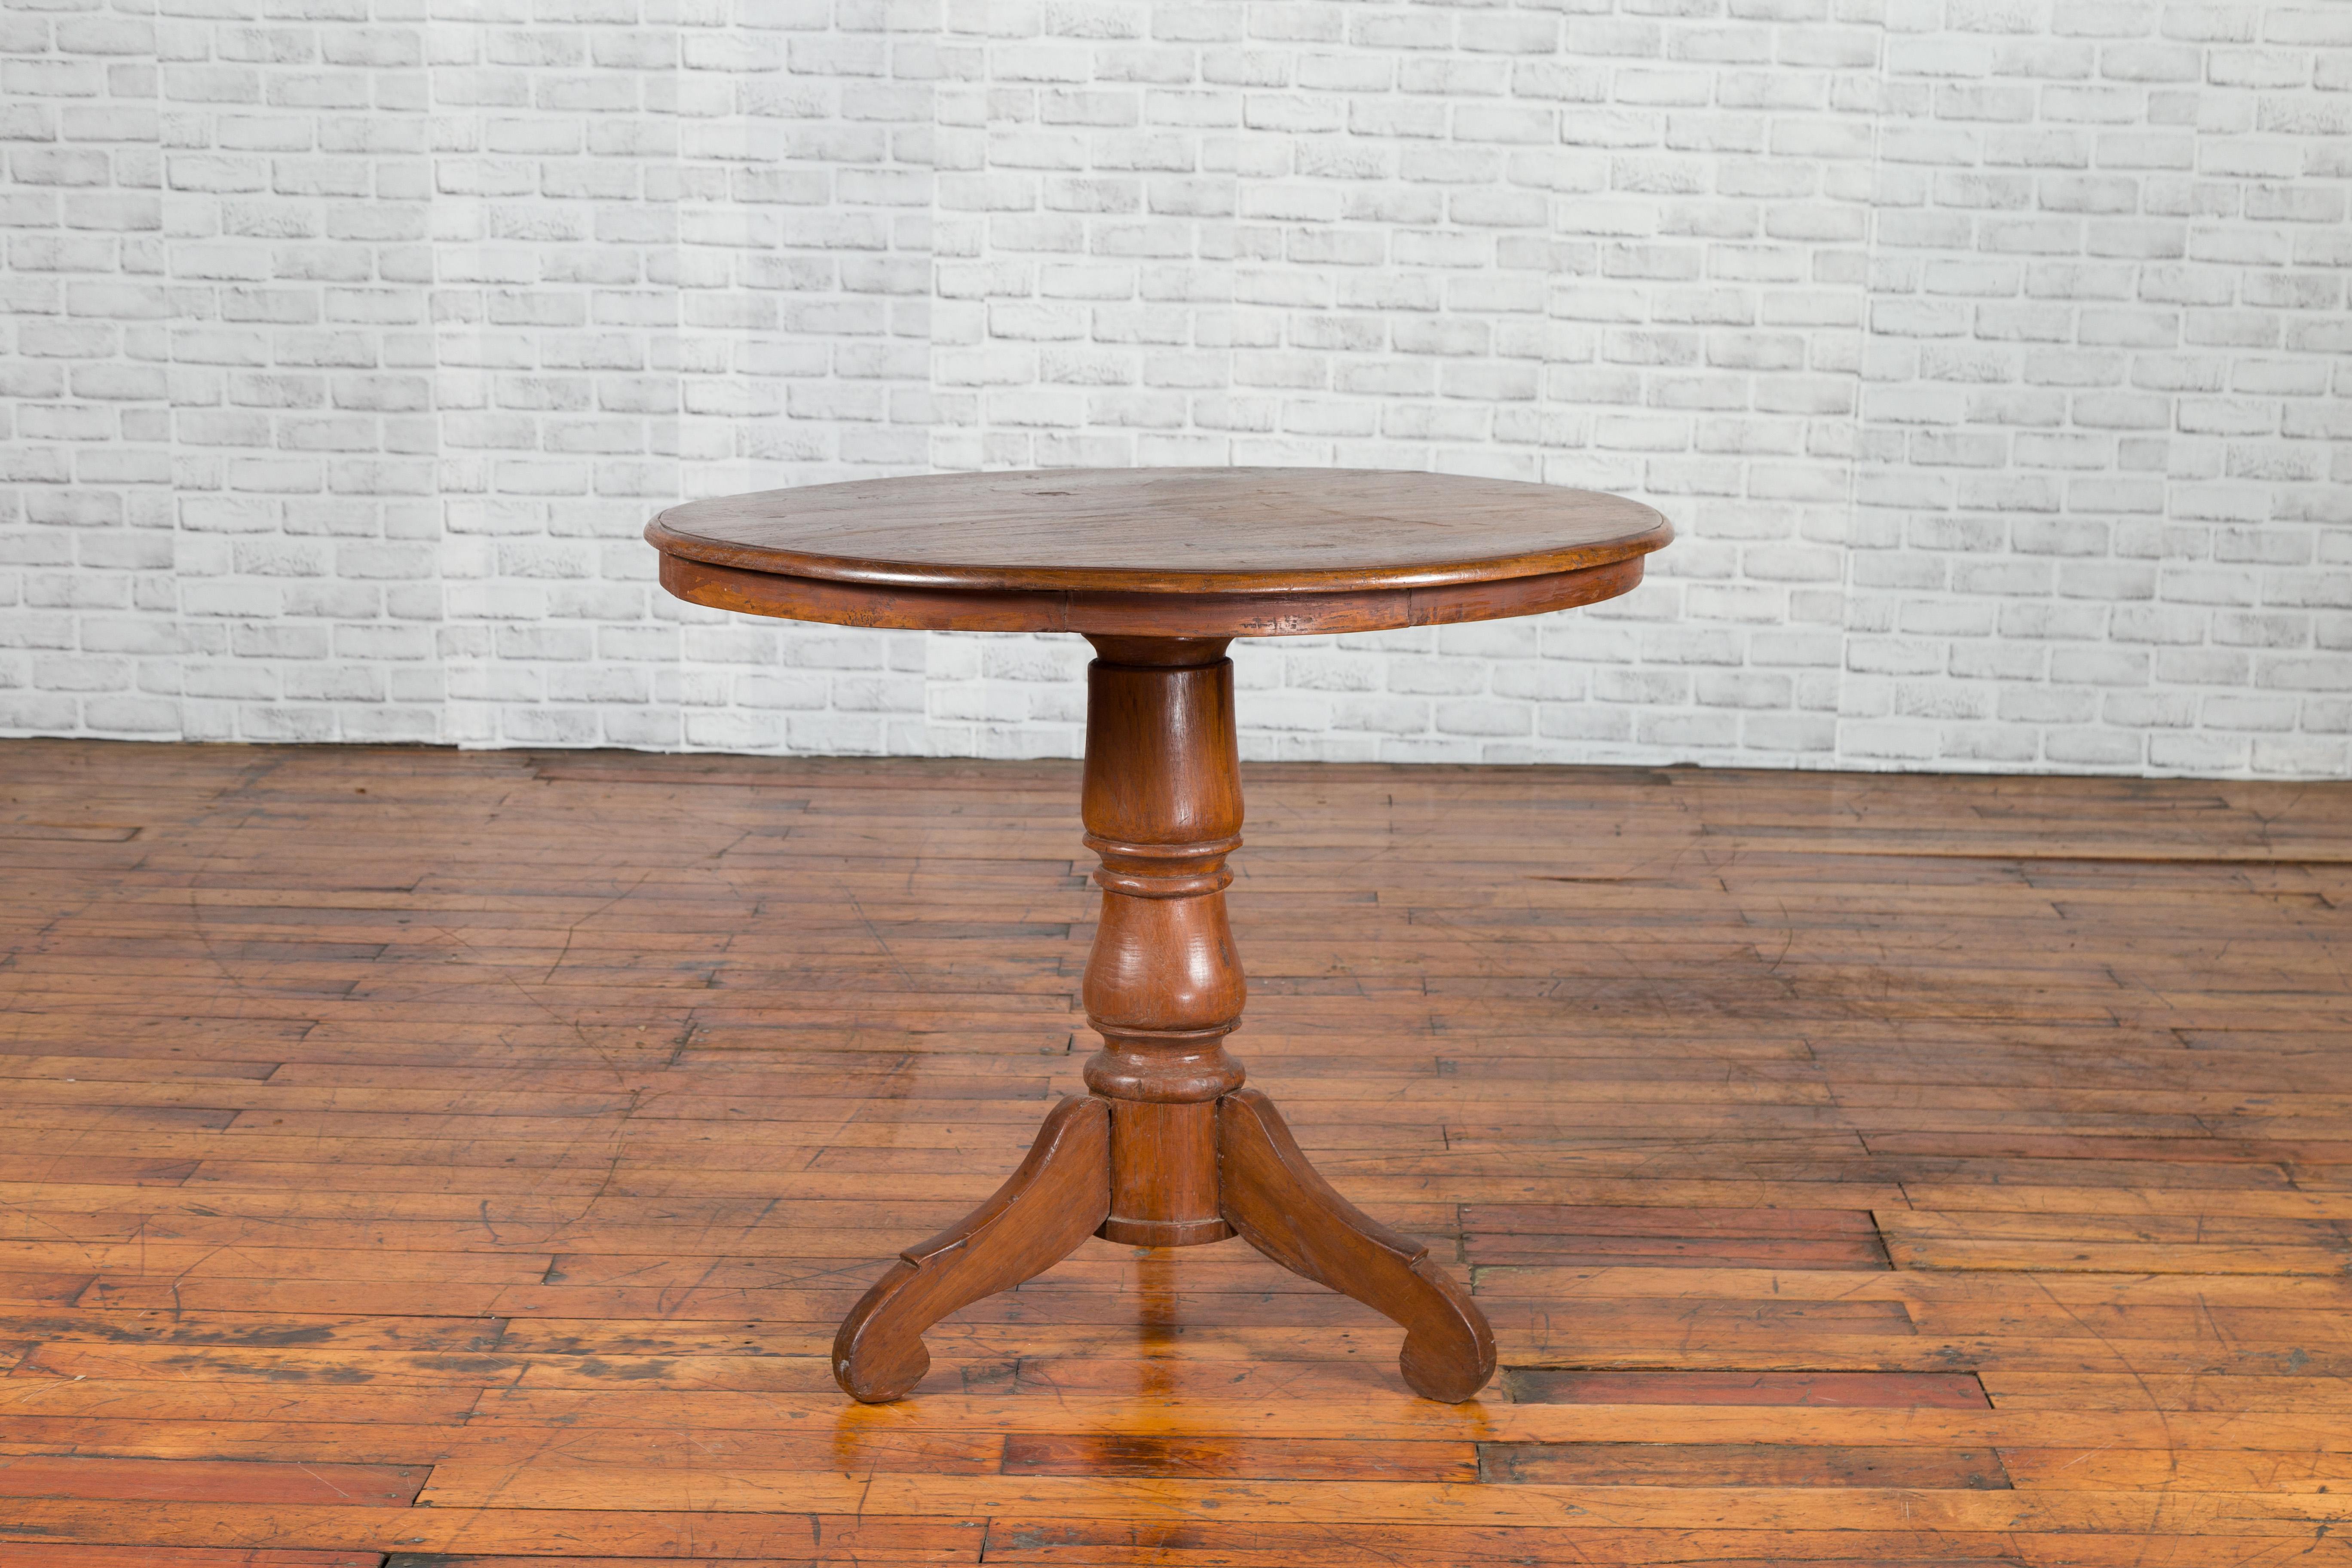 Vintage Dutch Colonial Indonesian Round Top Pedestal Table with Tripod Base For Sale 2